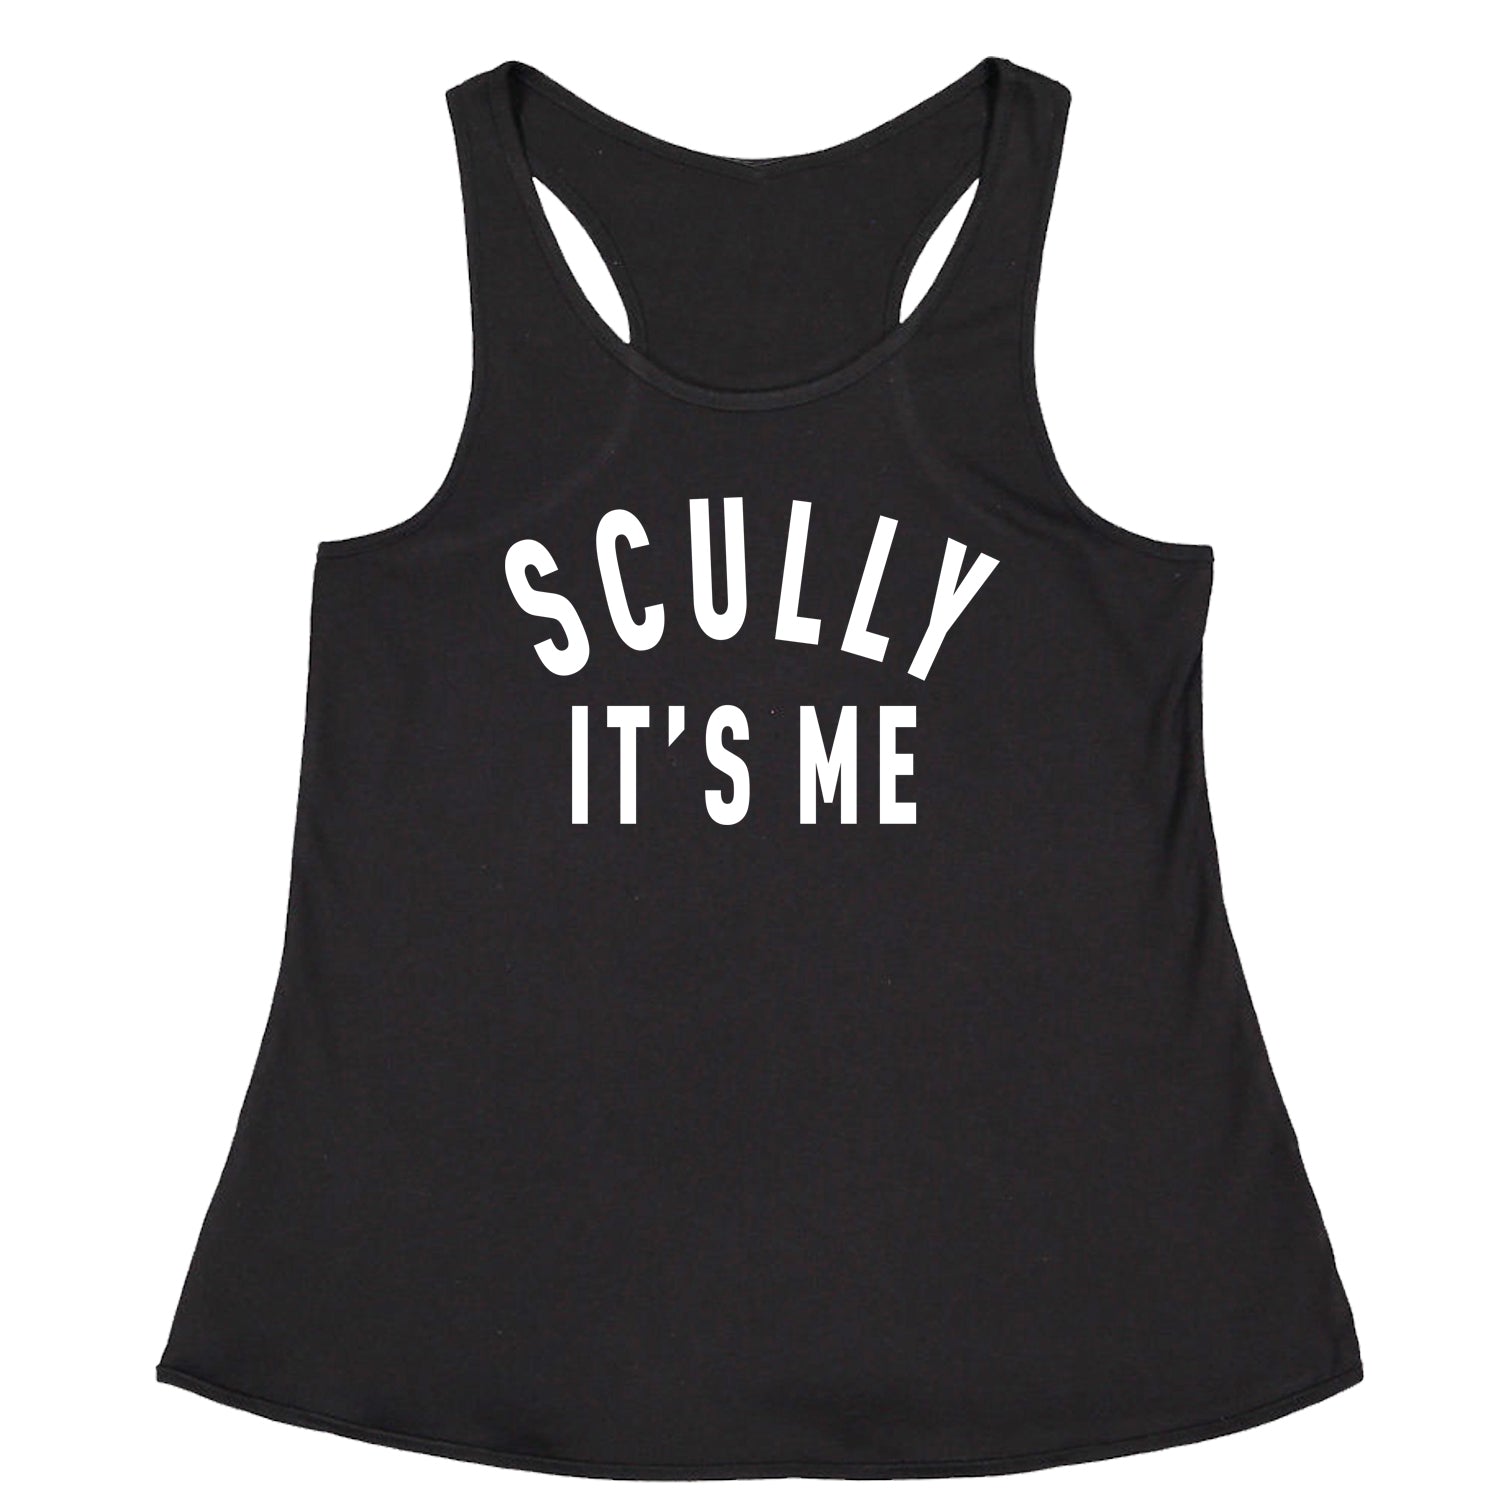 Scully, It's Me Racerback Tank Top for Women #expressiontees by Expression Tees